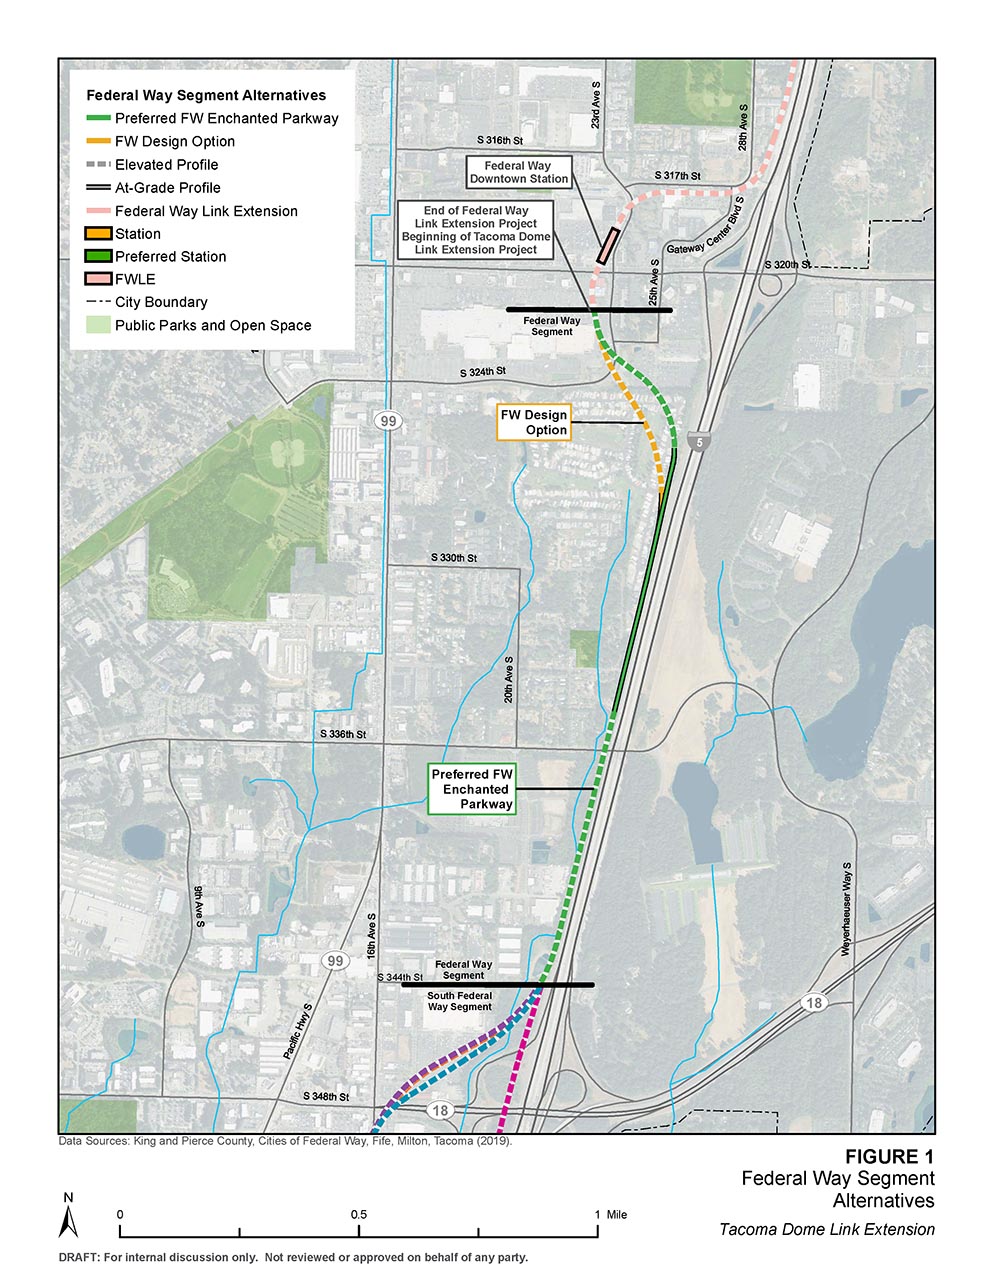 Satellite map of South Federal Way route and station alternatives. The preferred route alternative travels along Enchanted Parkway S with station alternatives at Enchanted Parkway S and S 352nd St. Another route alternative travels adjacent to I-5 with a station alternative near S 356th St. Click map to view a full-size PDF map.